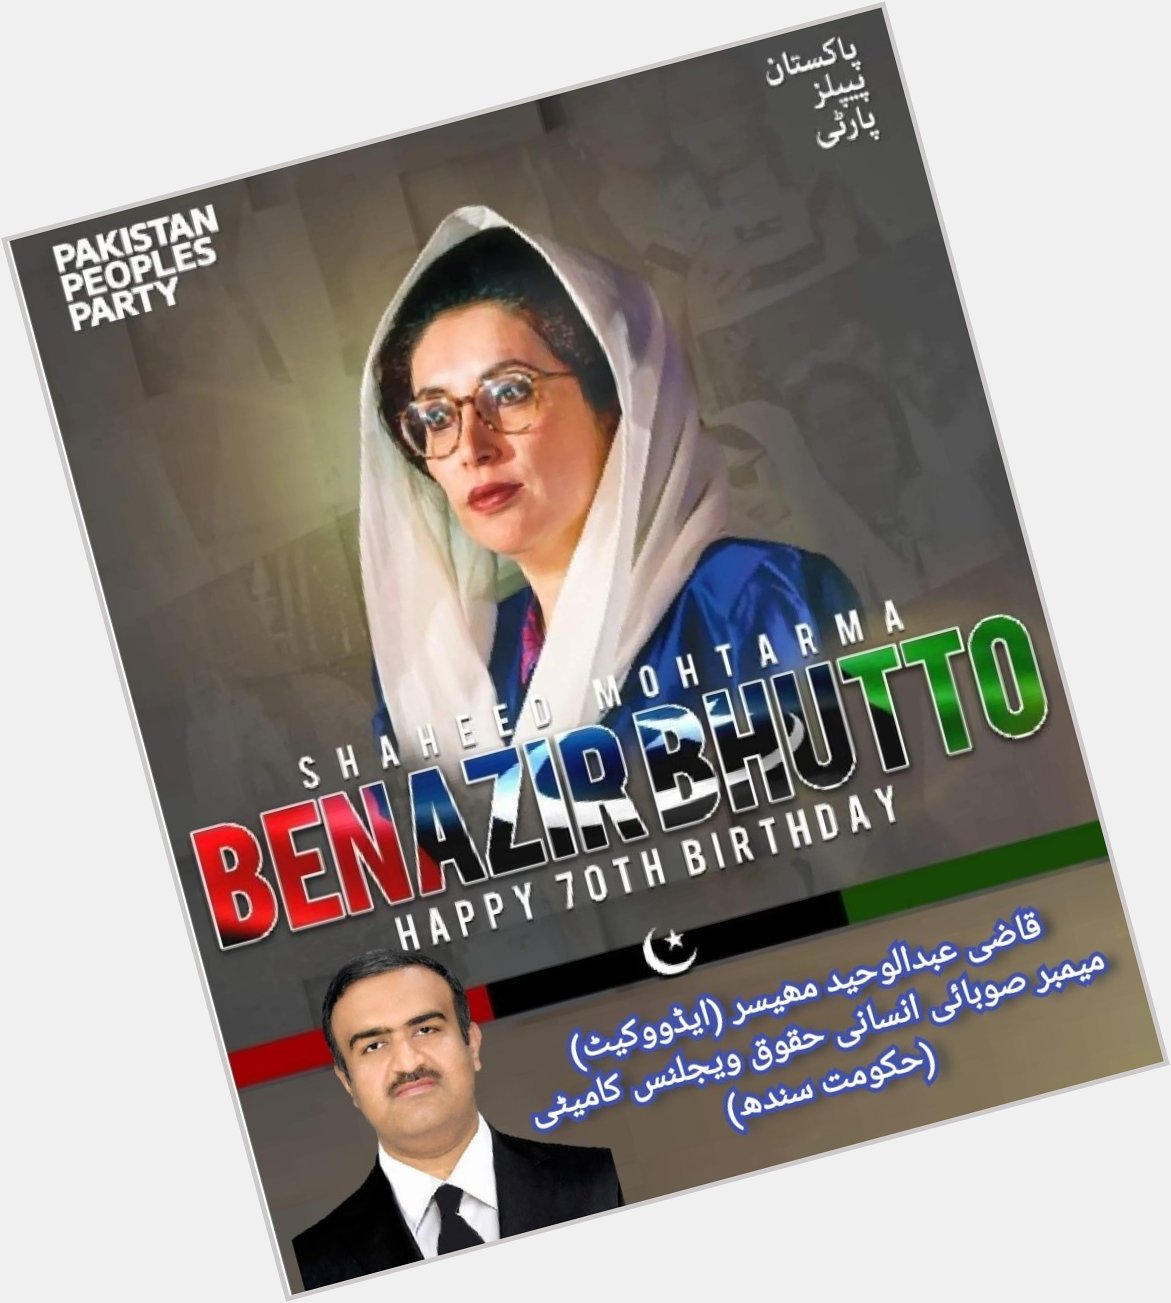    Happy Birthday to Our Great Leader Shaheed Muhtarma Benazir Bhutto 